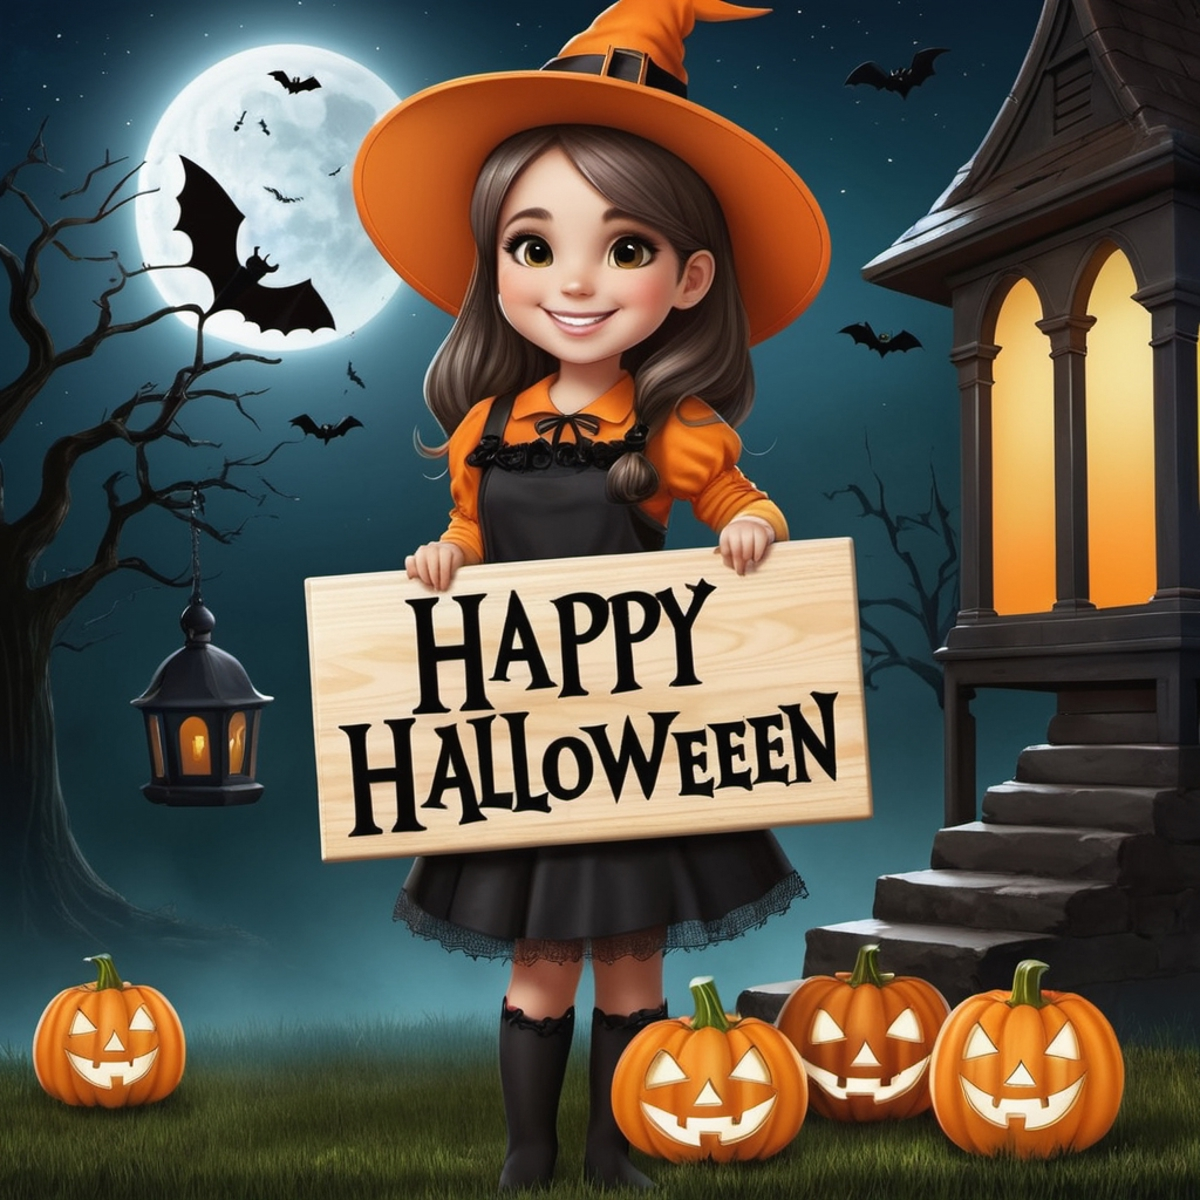 A little girl wearing a witch costume holding a sign that says Happy Halloween.